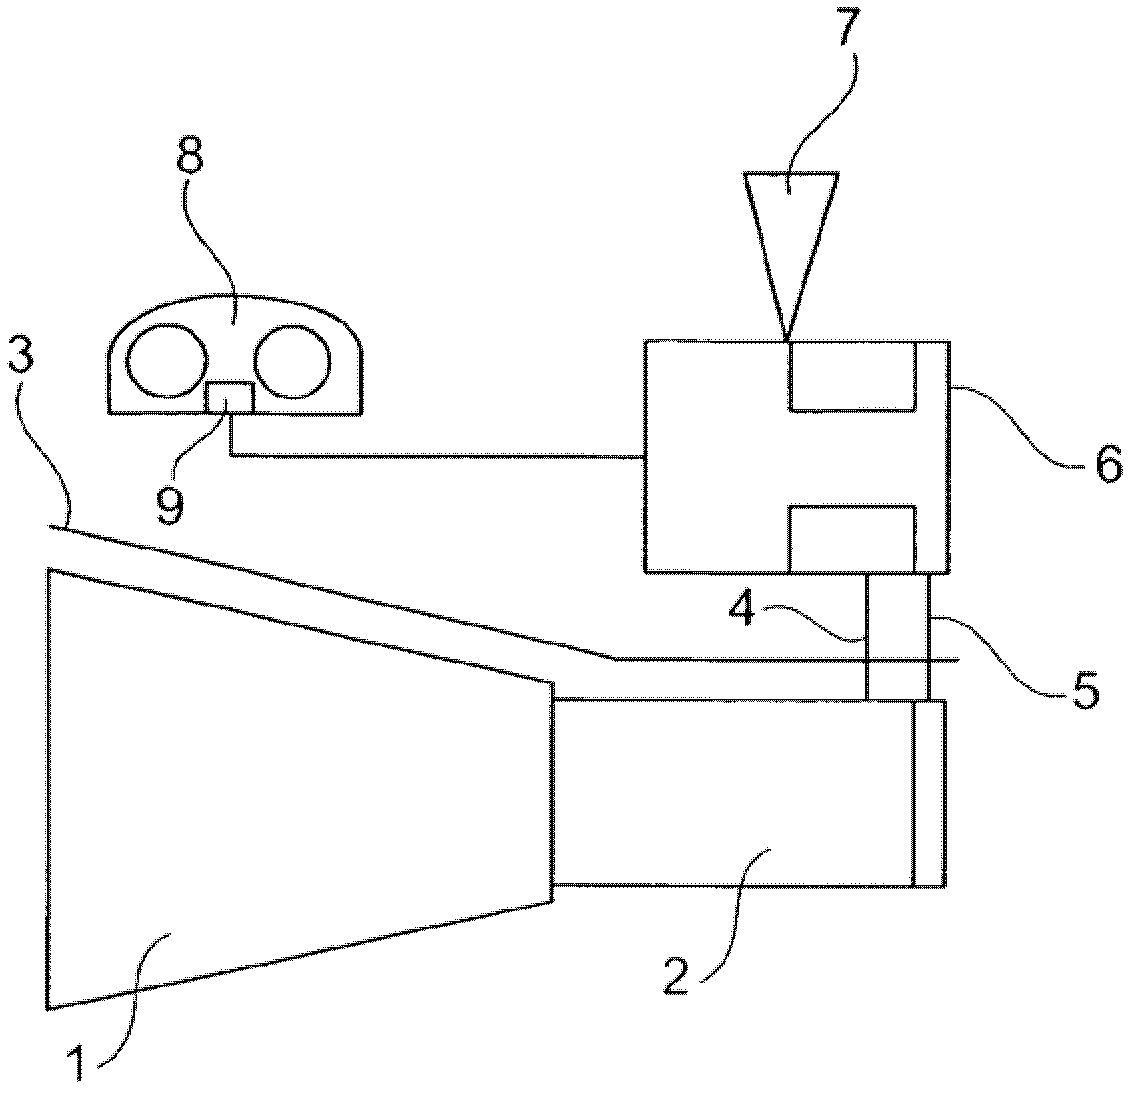 Vehicle having a transmission and a selection element for shifting gears